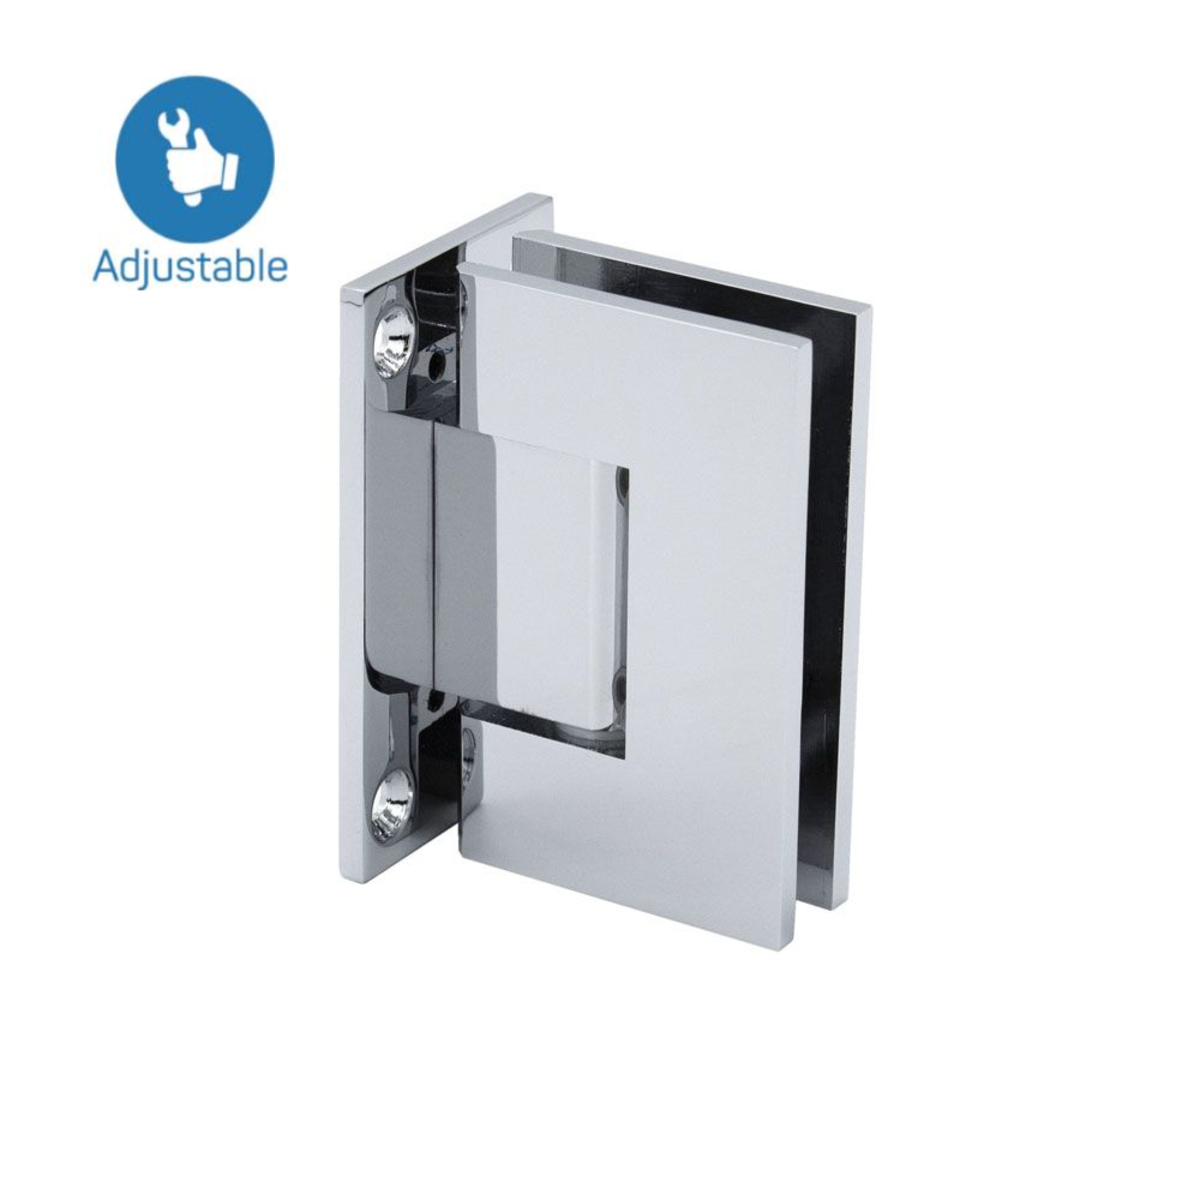 Wall to Glass Full Back Plate Adjustable Hinge